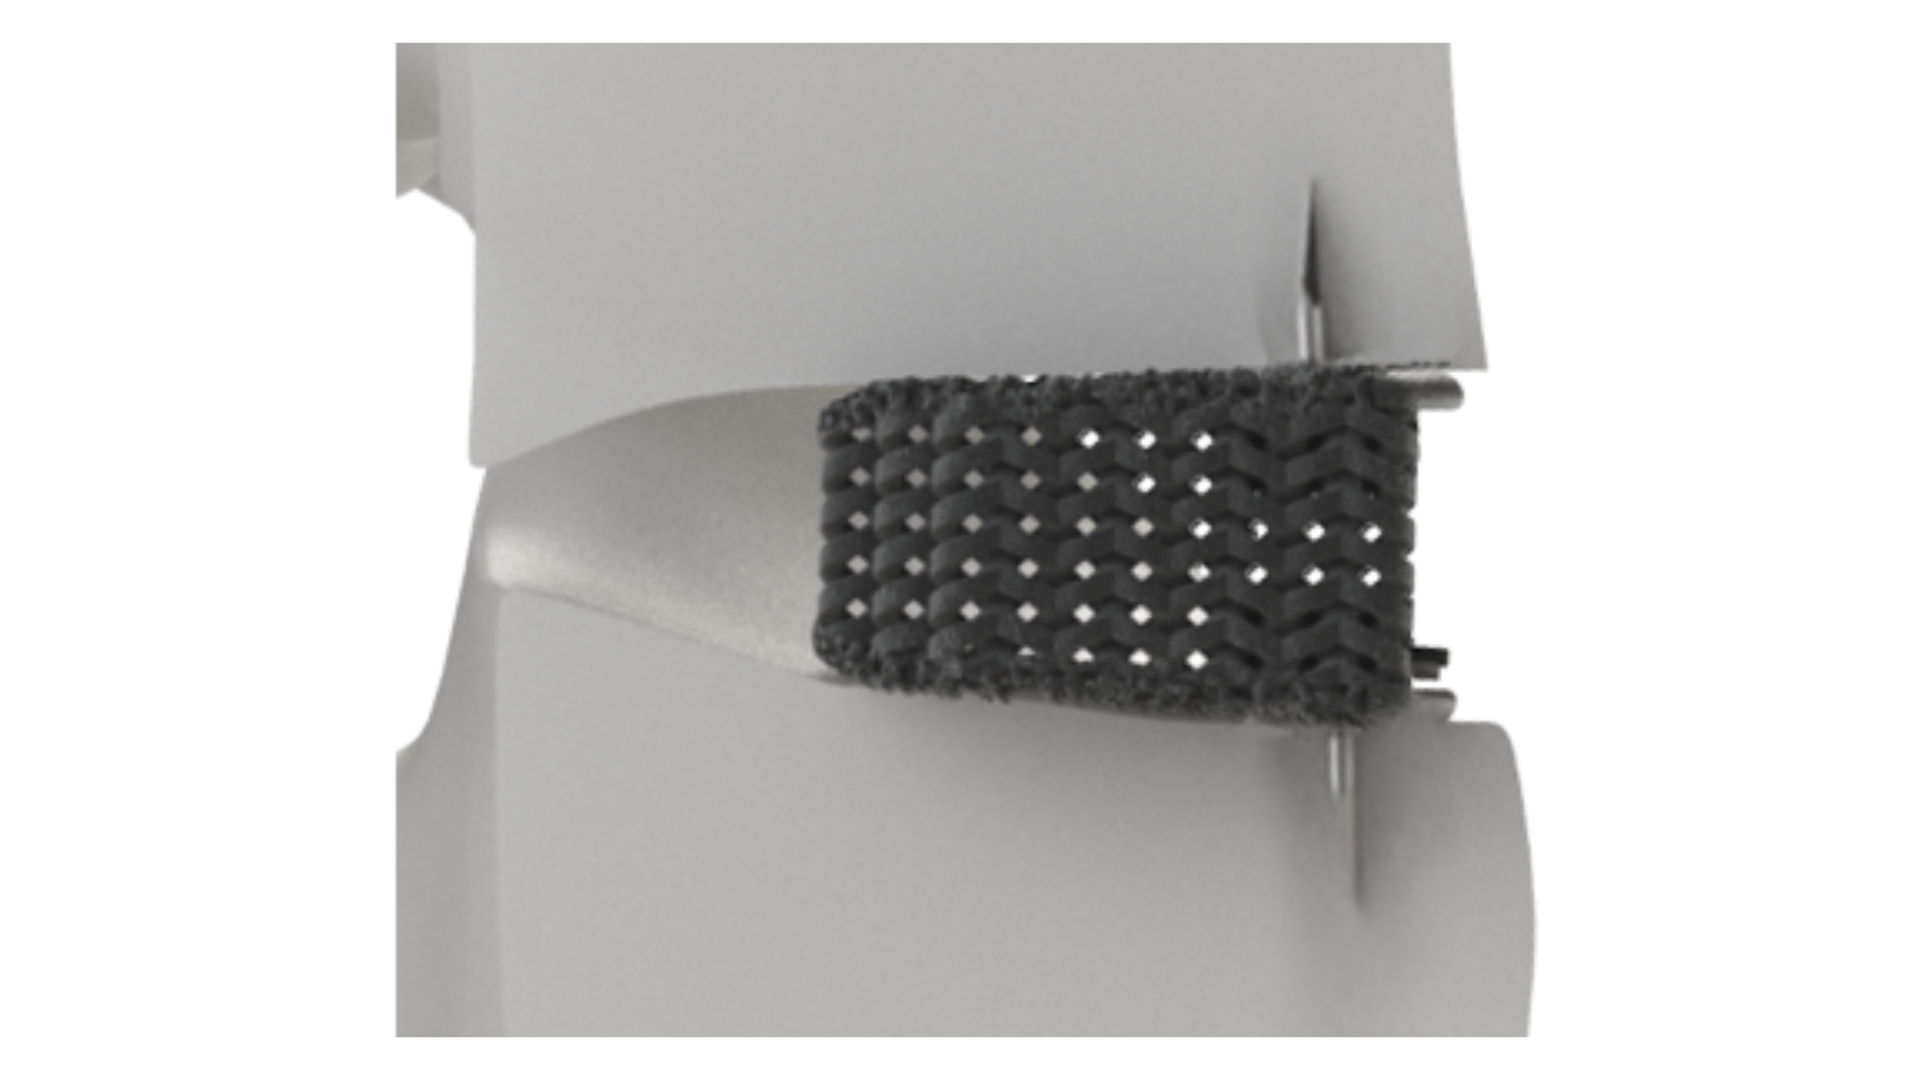 Nexus Spine announced the beta launch of Stable-C™, 3D printed cervical interbody fusion implants featuring integrated anchoring blades.